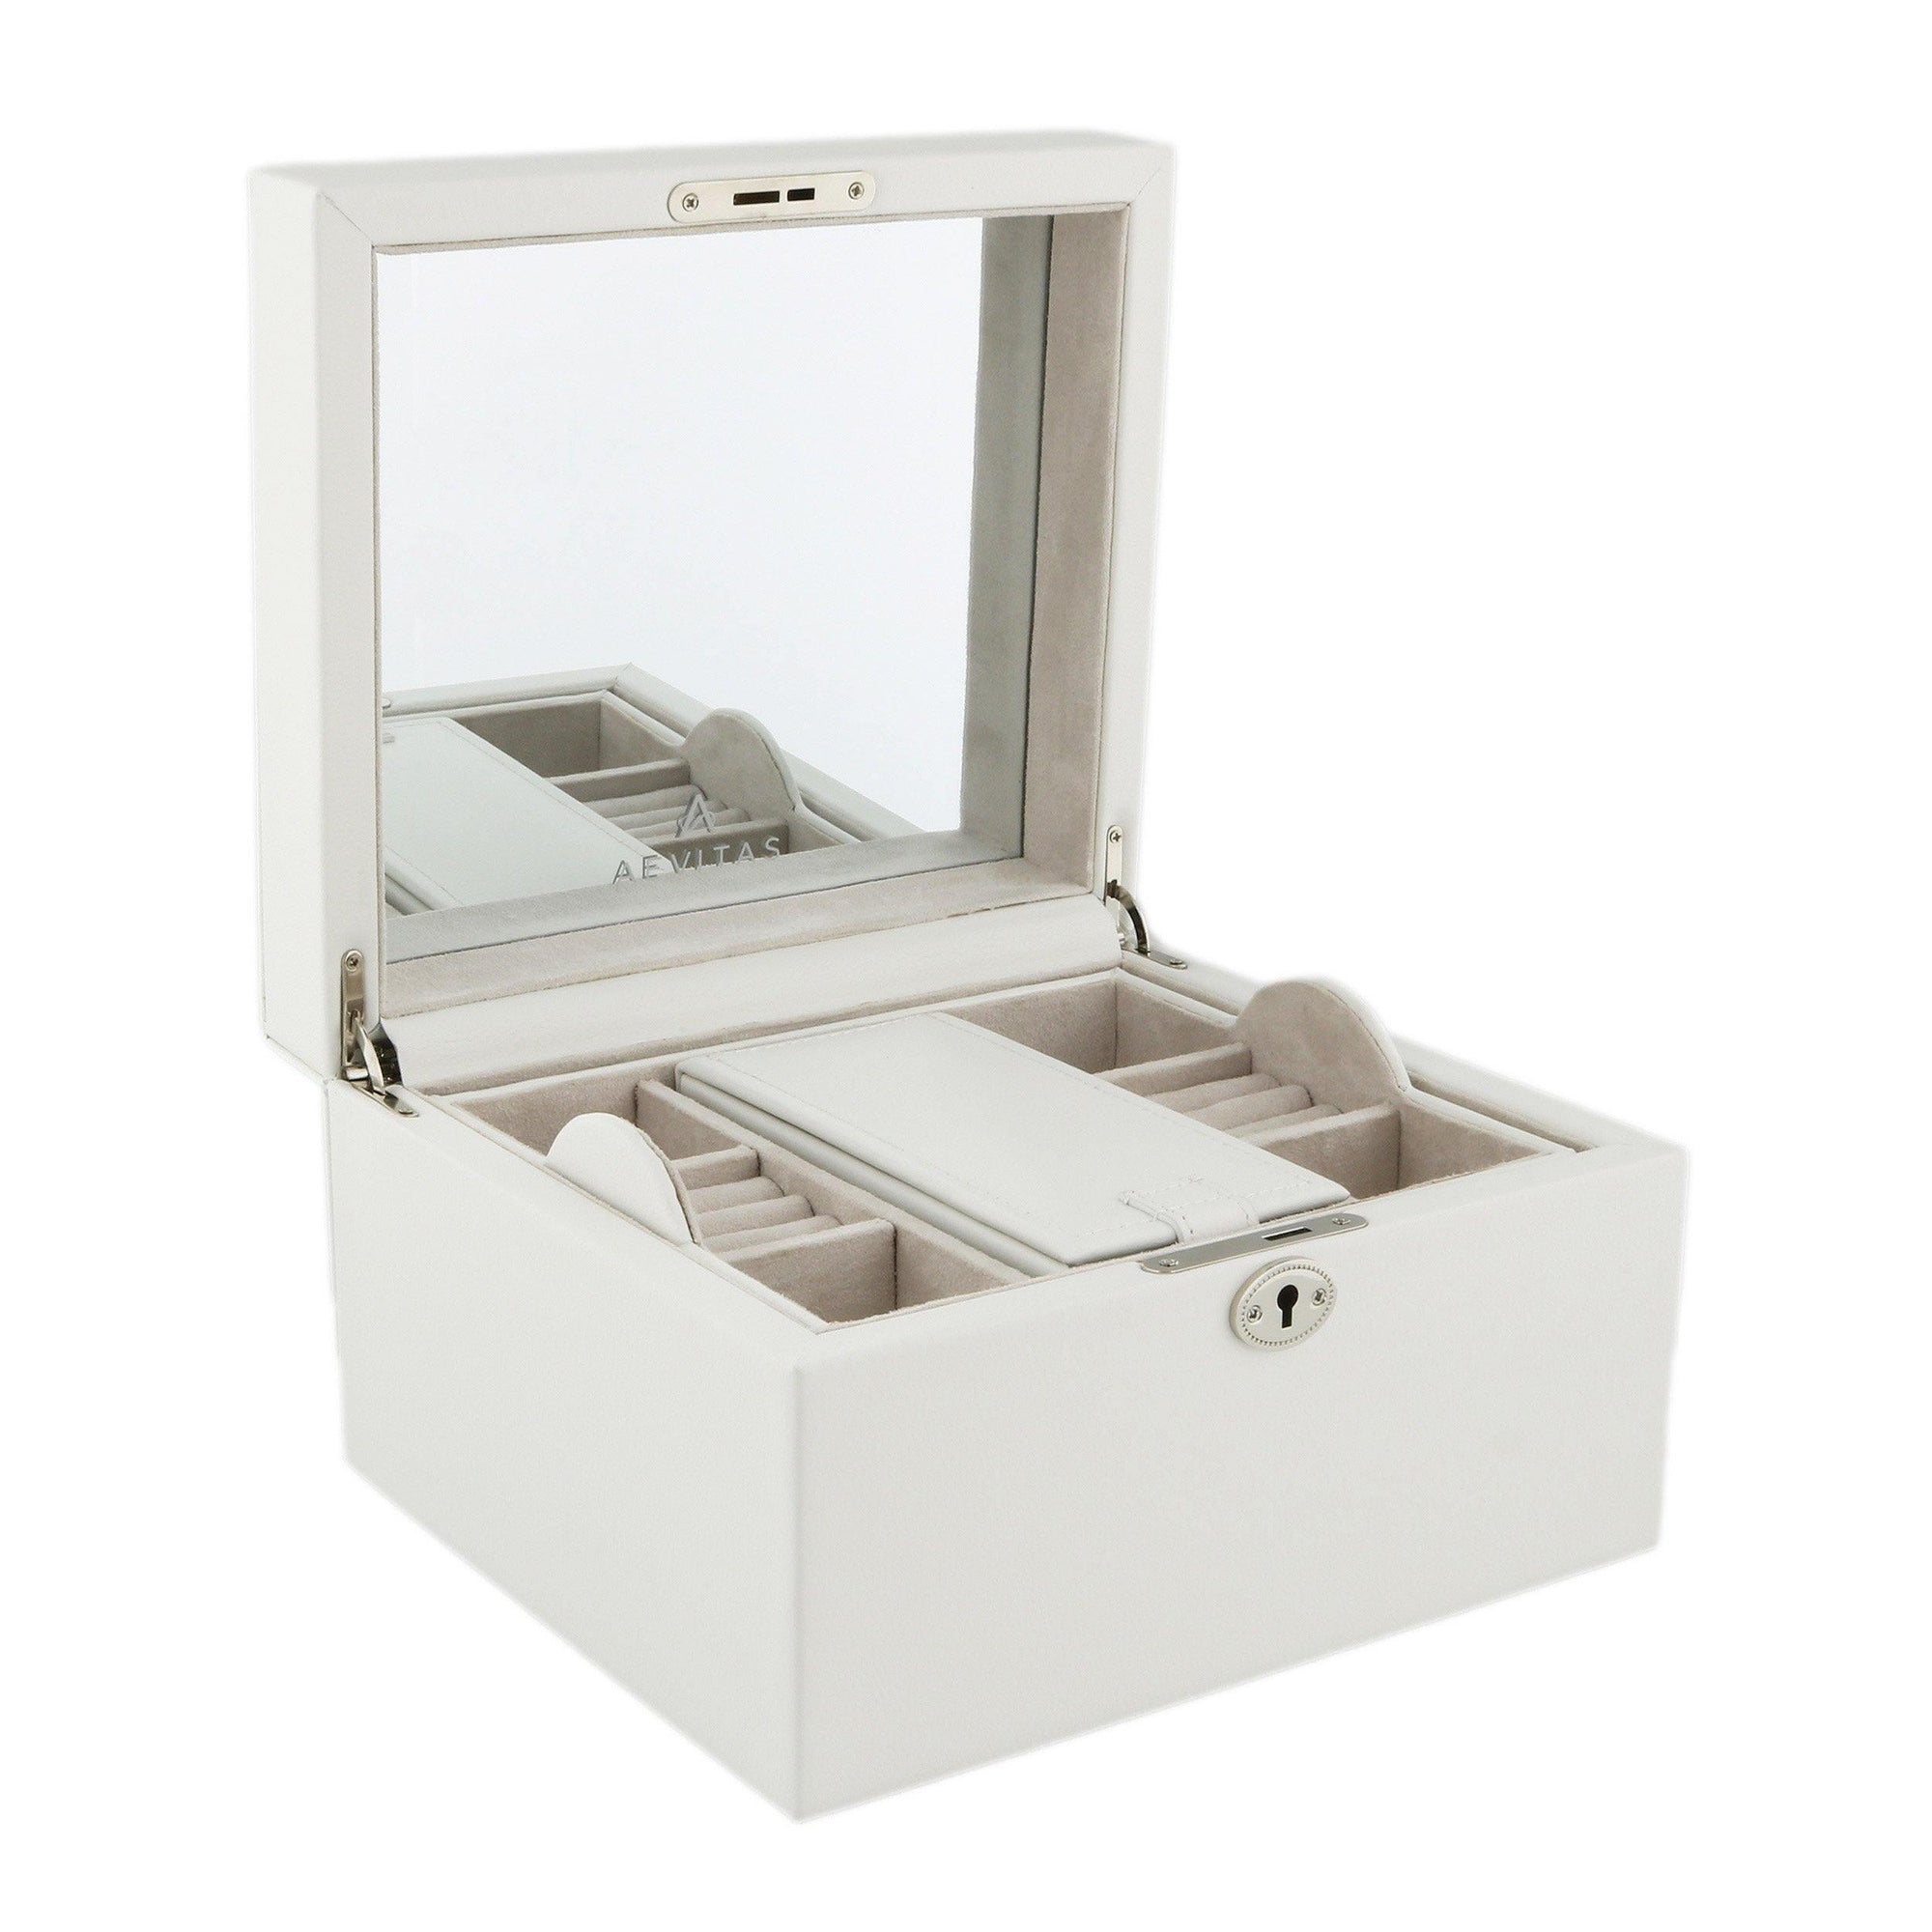 Finest Quality Large Size Ivory Bonded Leather Jewellery Box by Aevitas